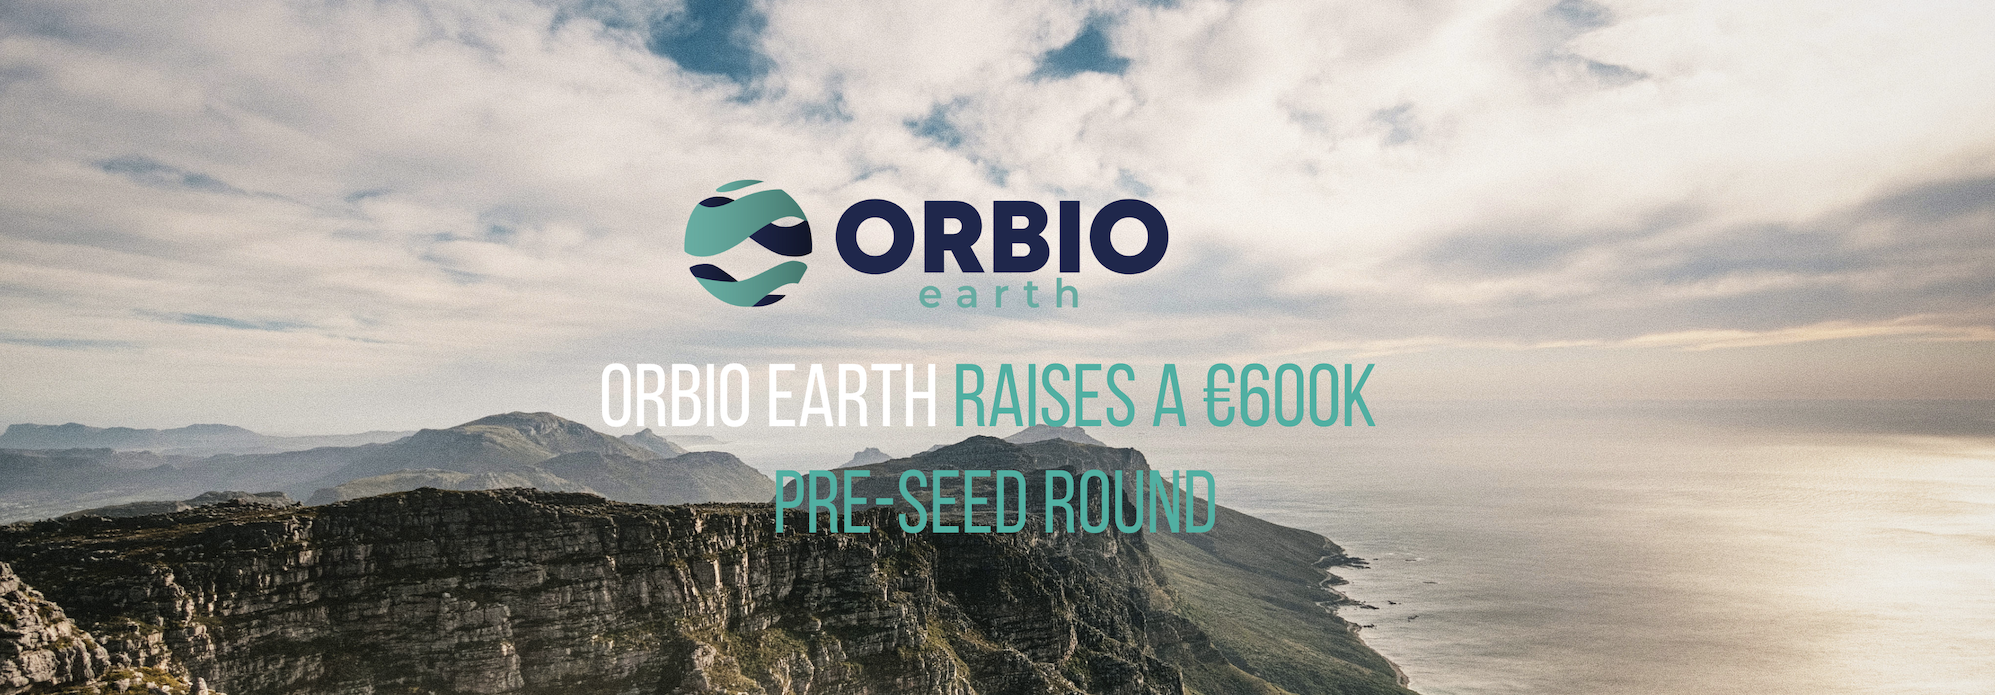 Orbio Earth - Monitoring methane emissions with satellites